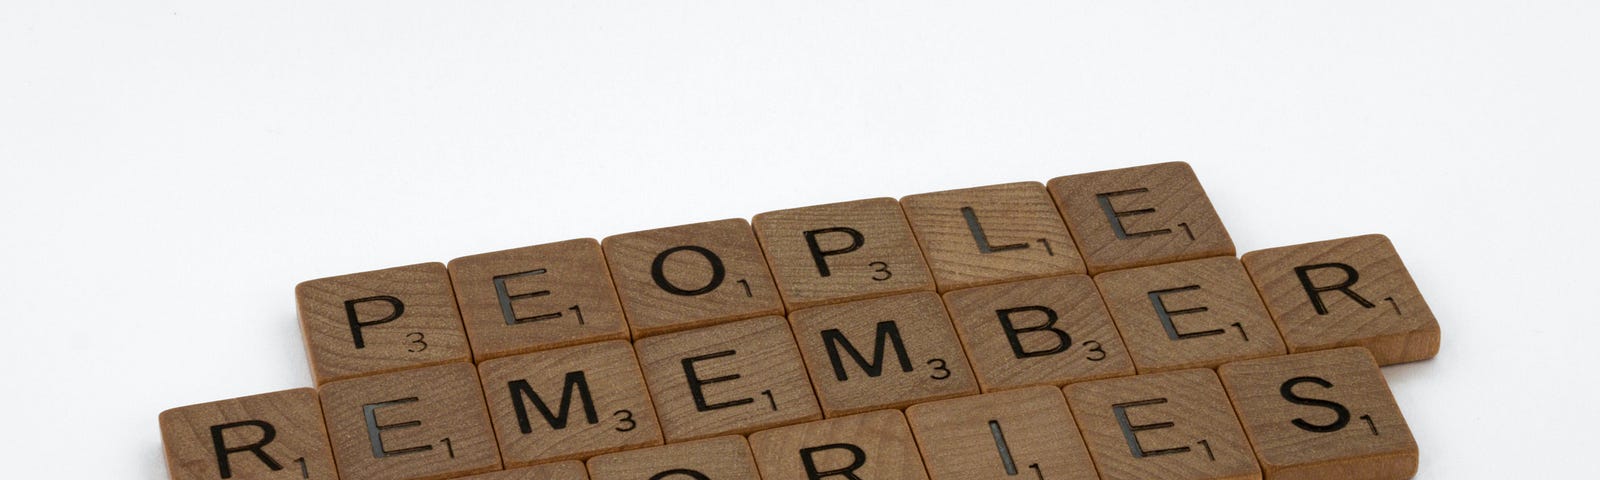 Scrabble tiles reading “People Remember Stories”